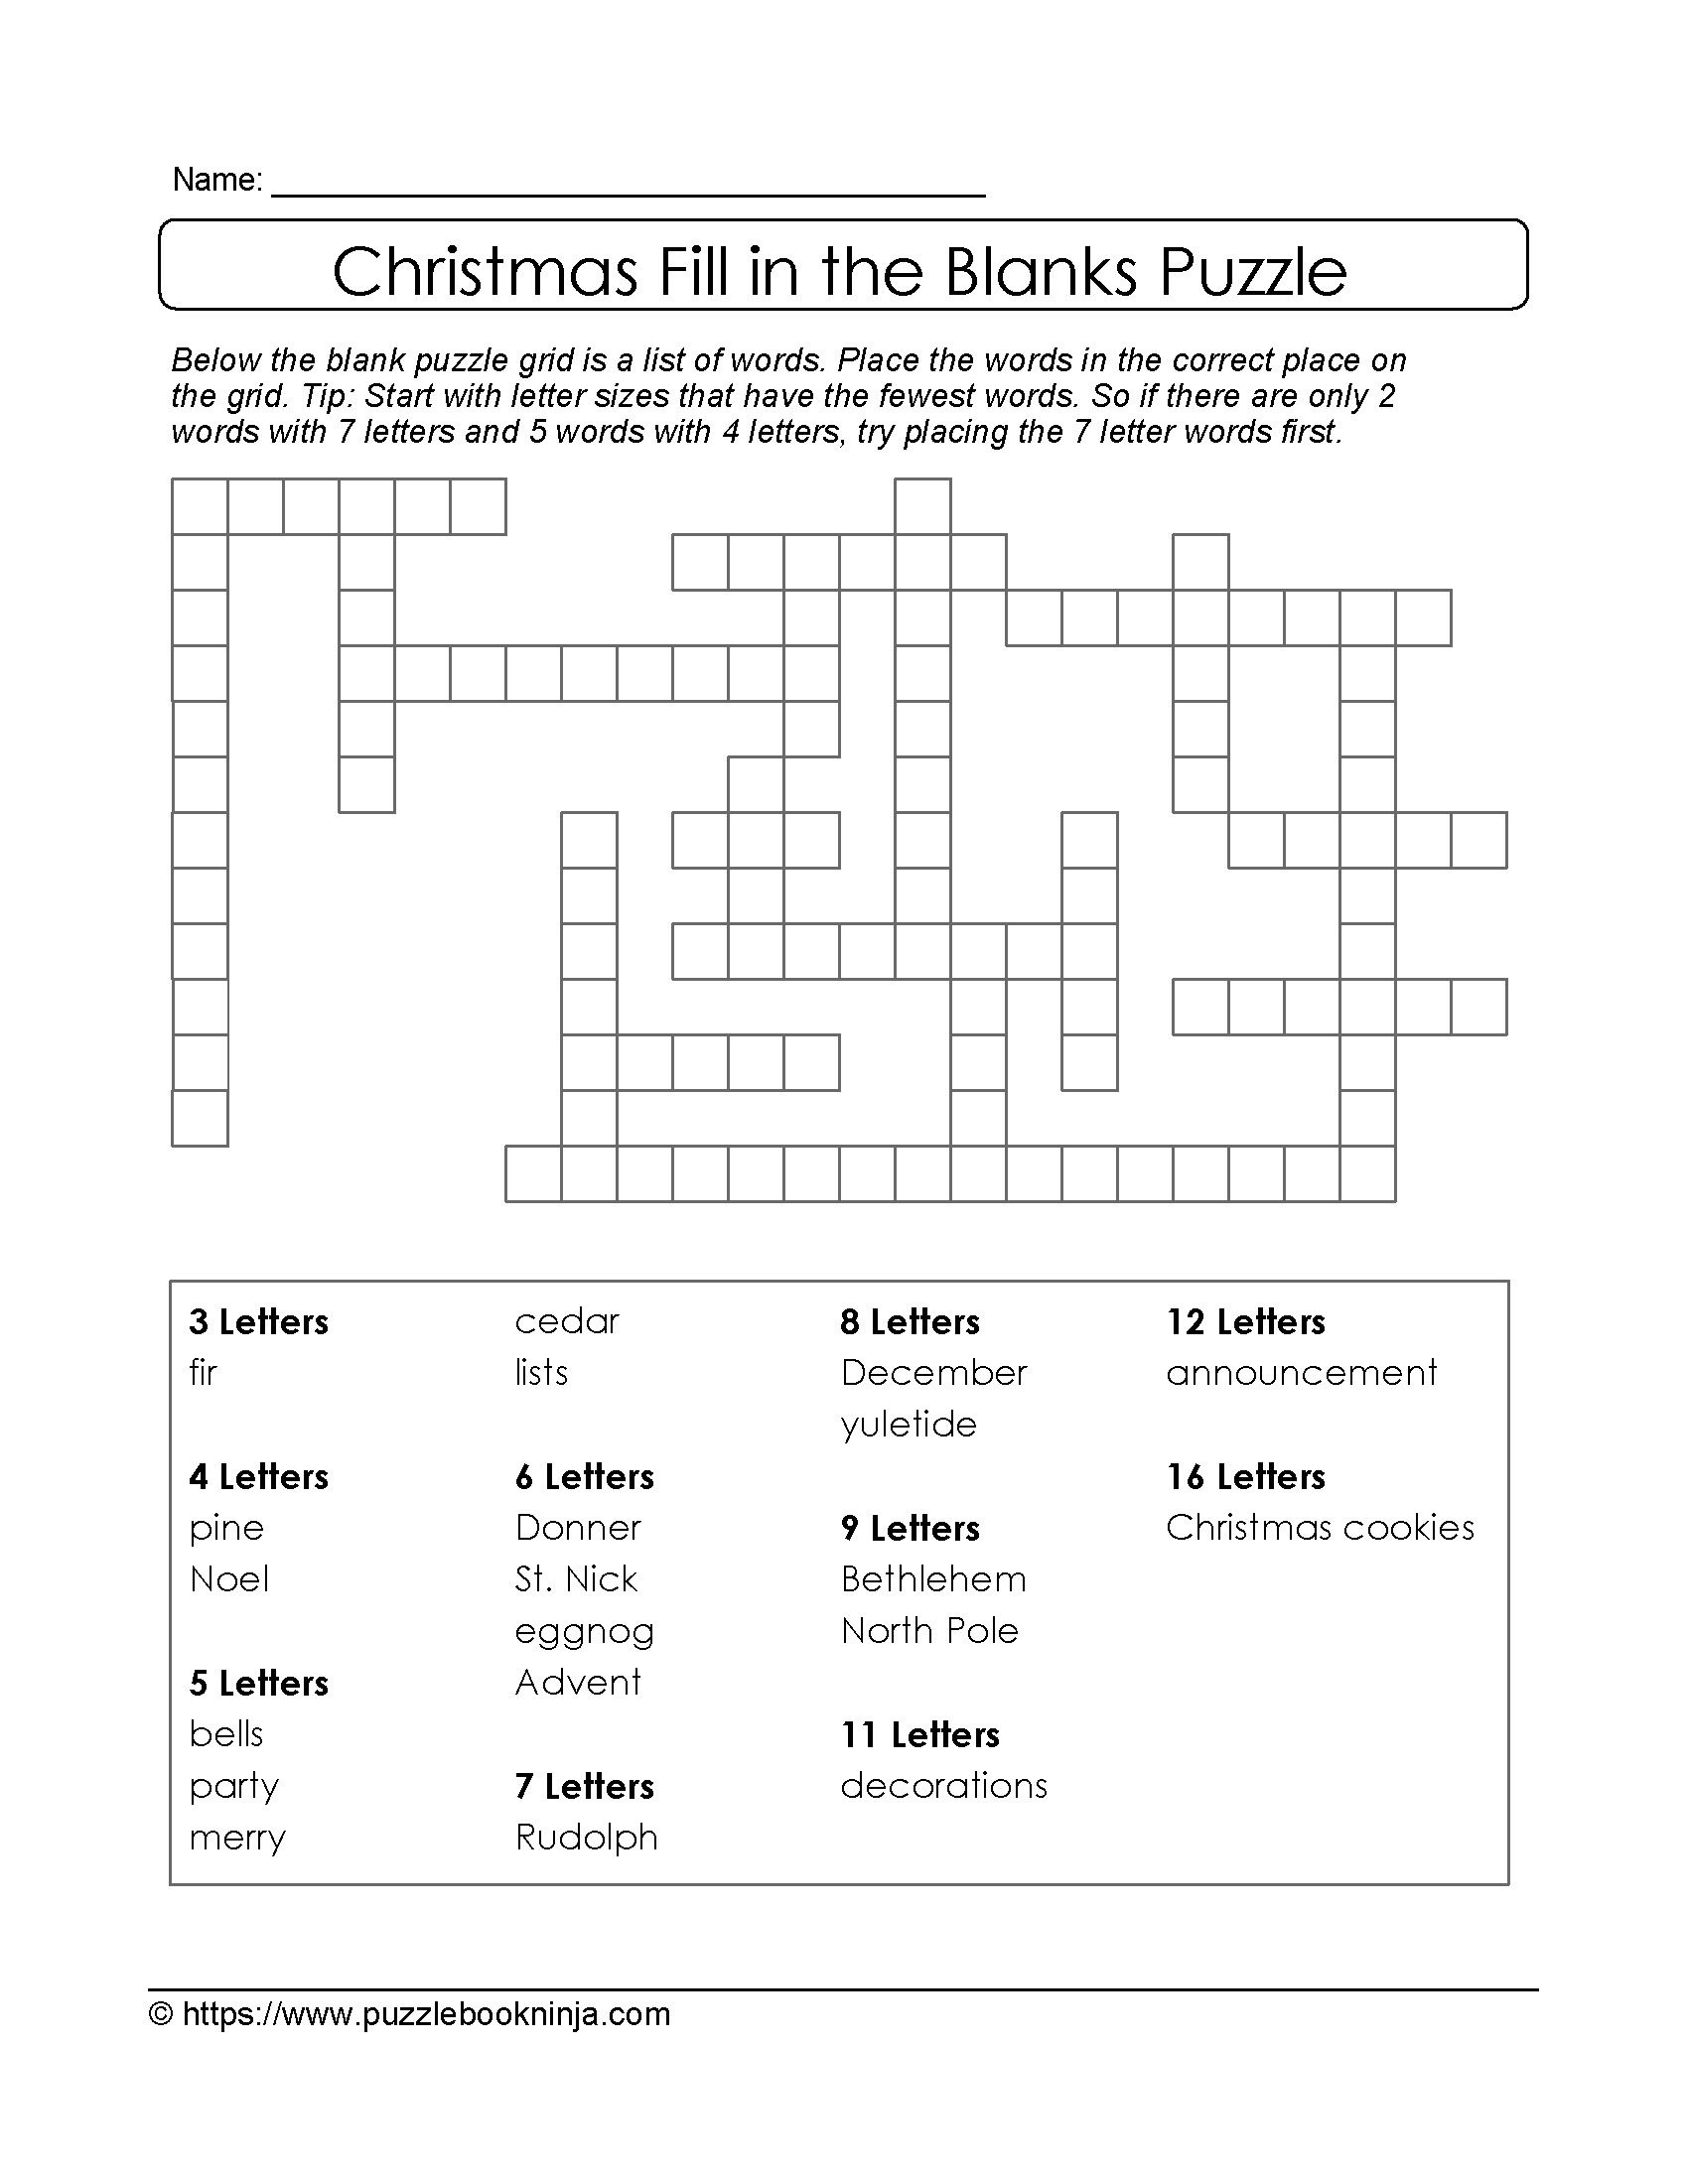 Christmas Printable Puzzle. Free Fill In The Blanks. | Christmas - Printable Puzzles Hints